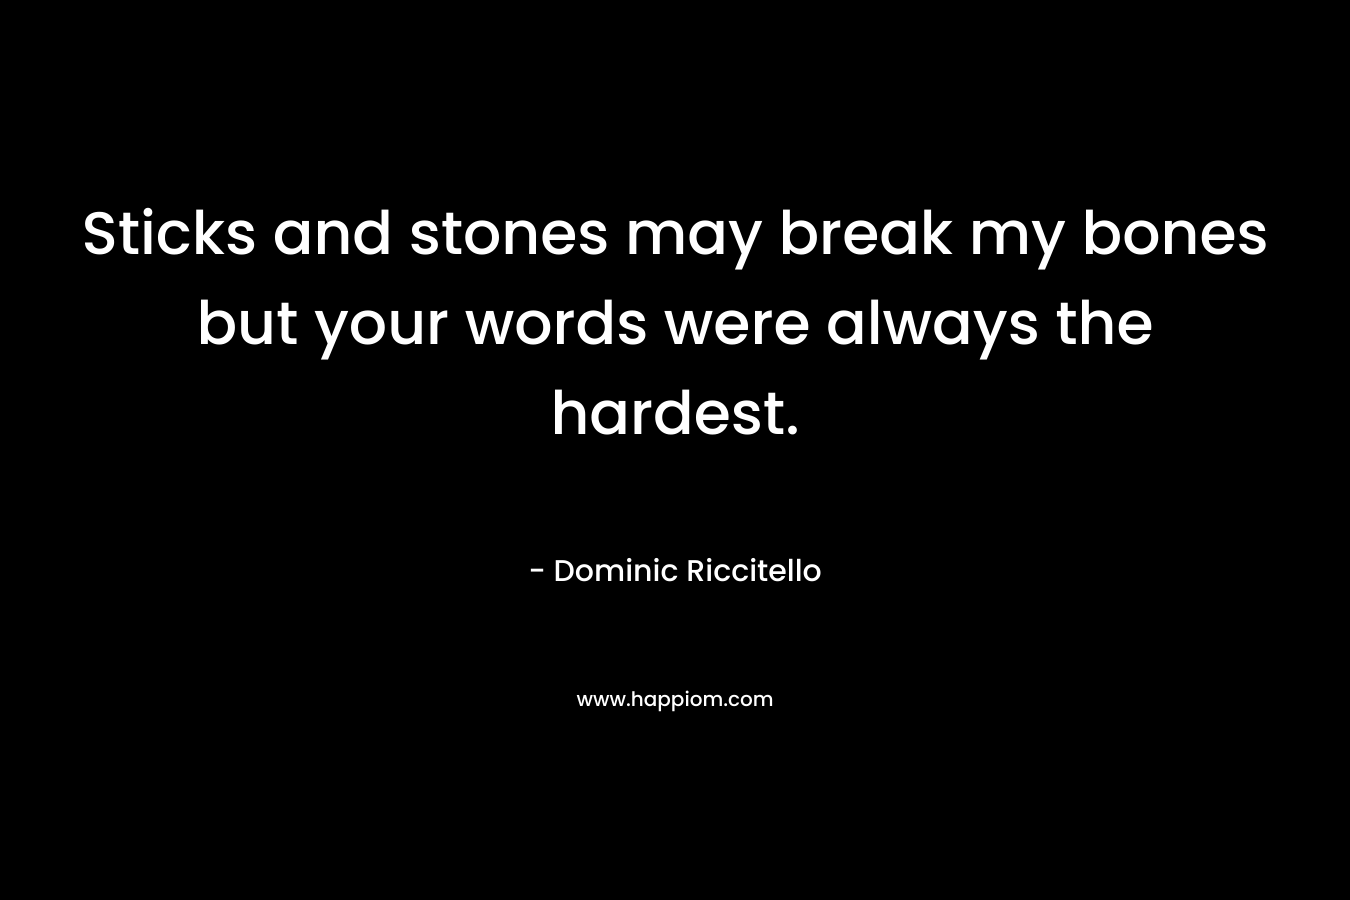 Sticks and stones may break my bones but your words were always the hardest.